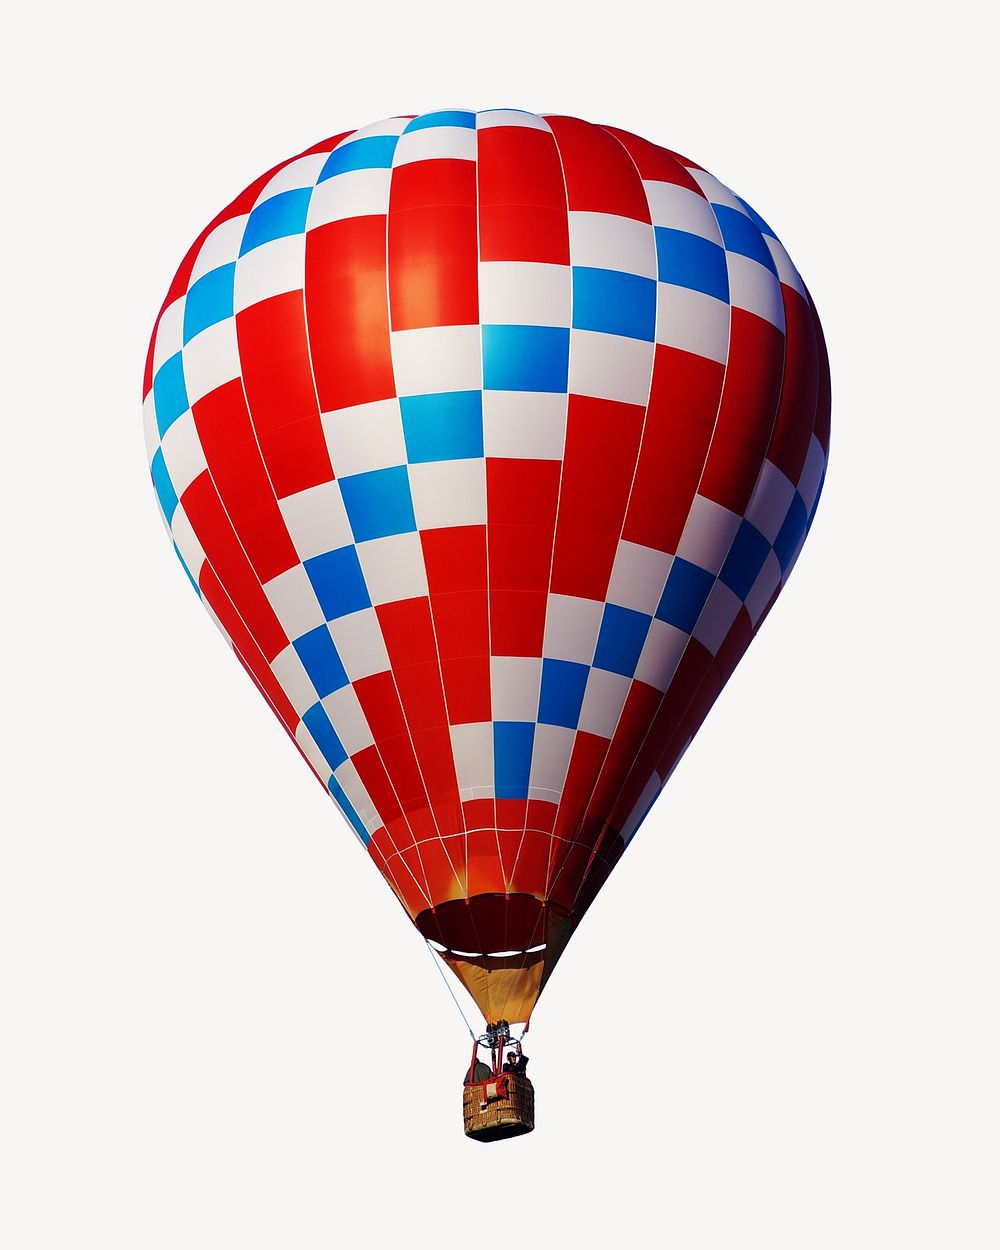 Hot air balloon, isolated image